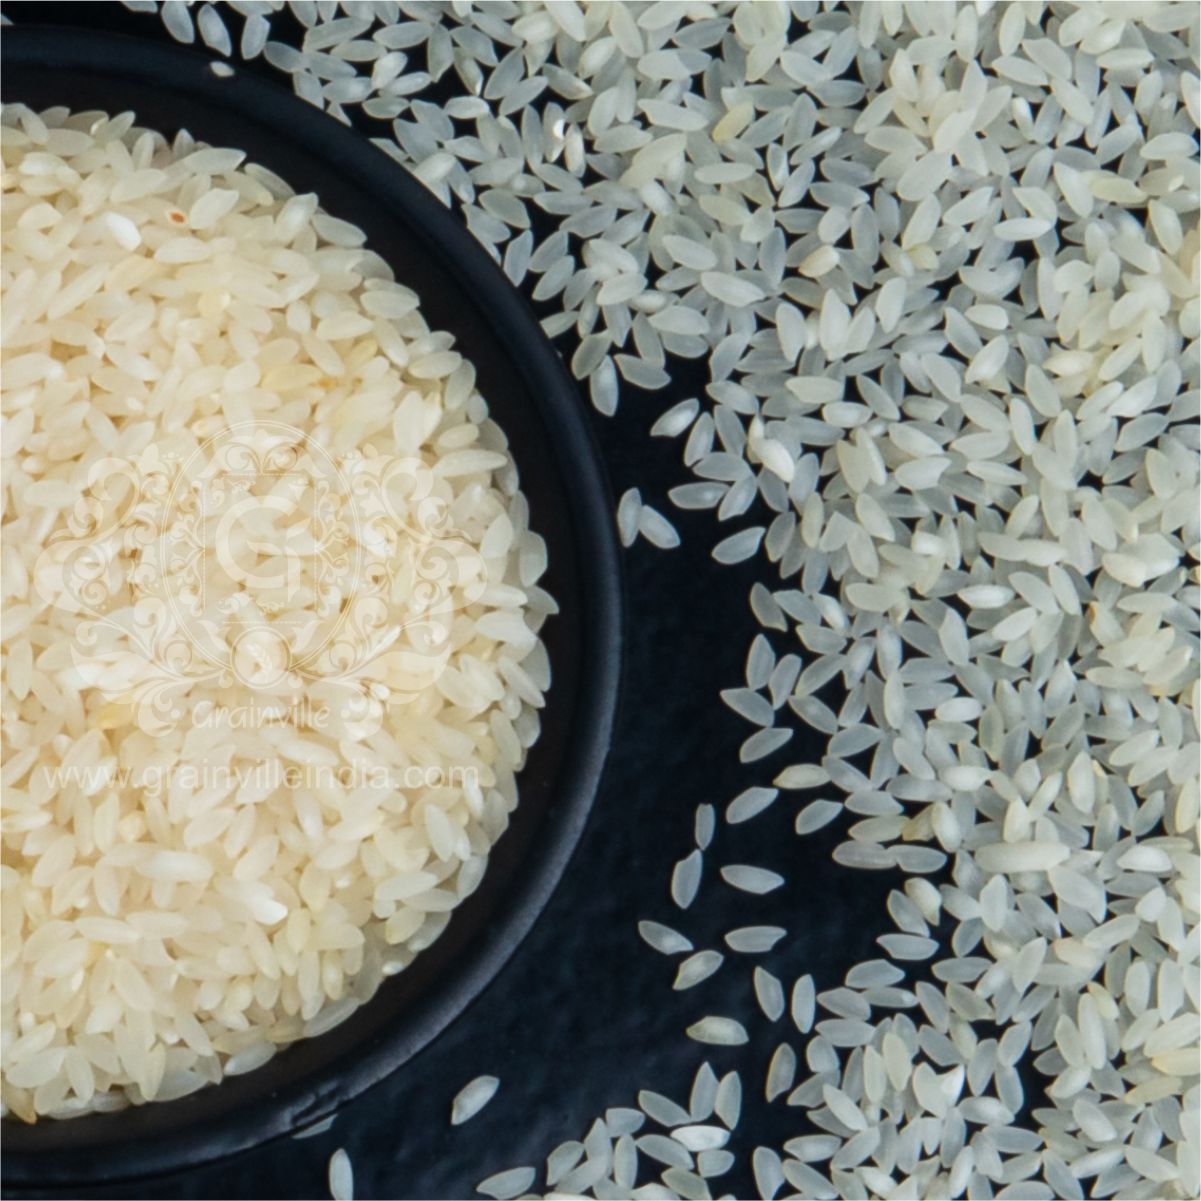 Ambe Mohar Rice (Ghee Rice) in a black bowl